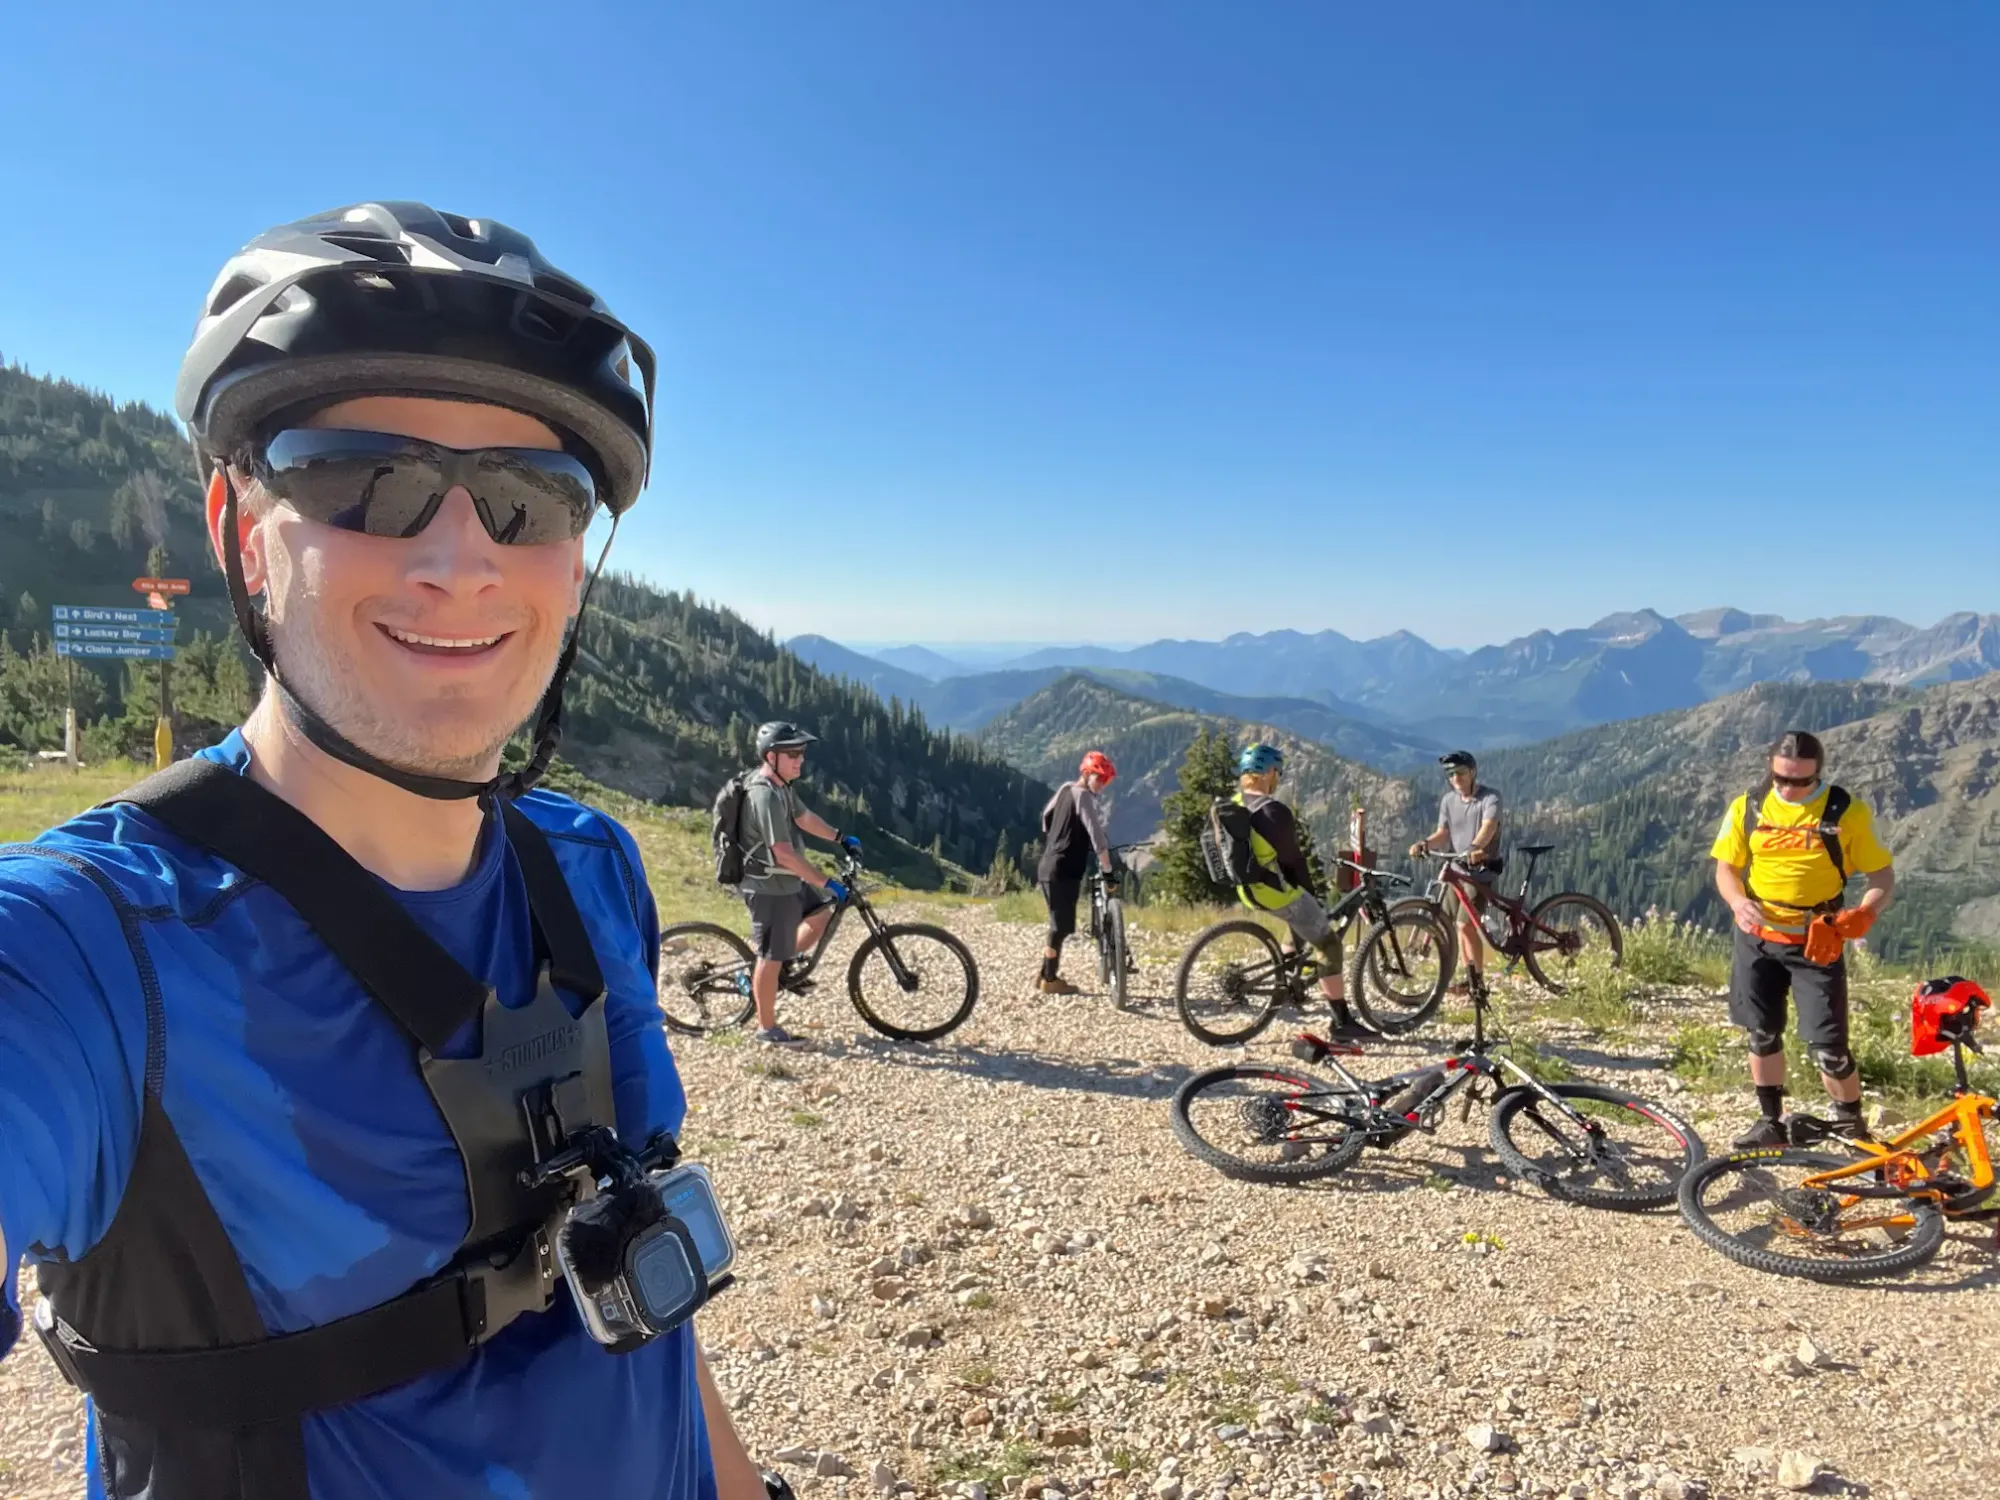 Keith is riding mountain bikes with a group of his new friends